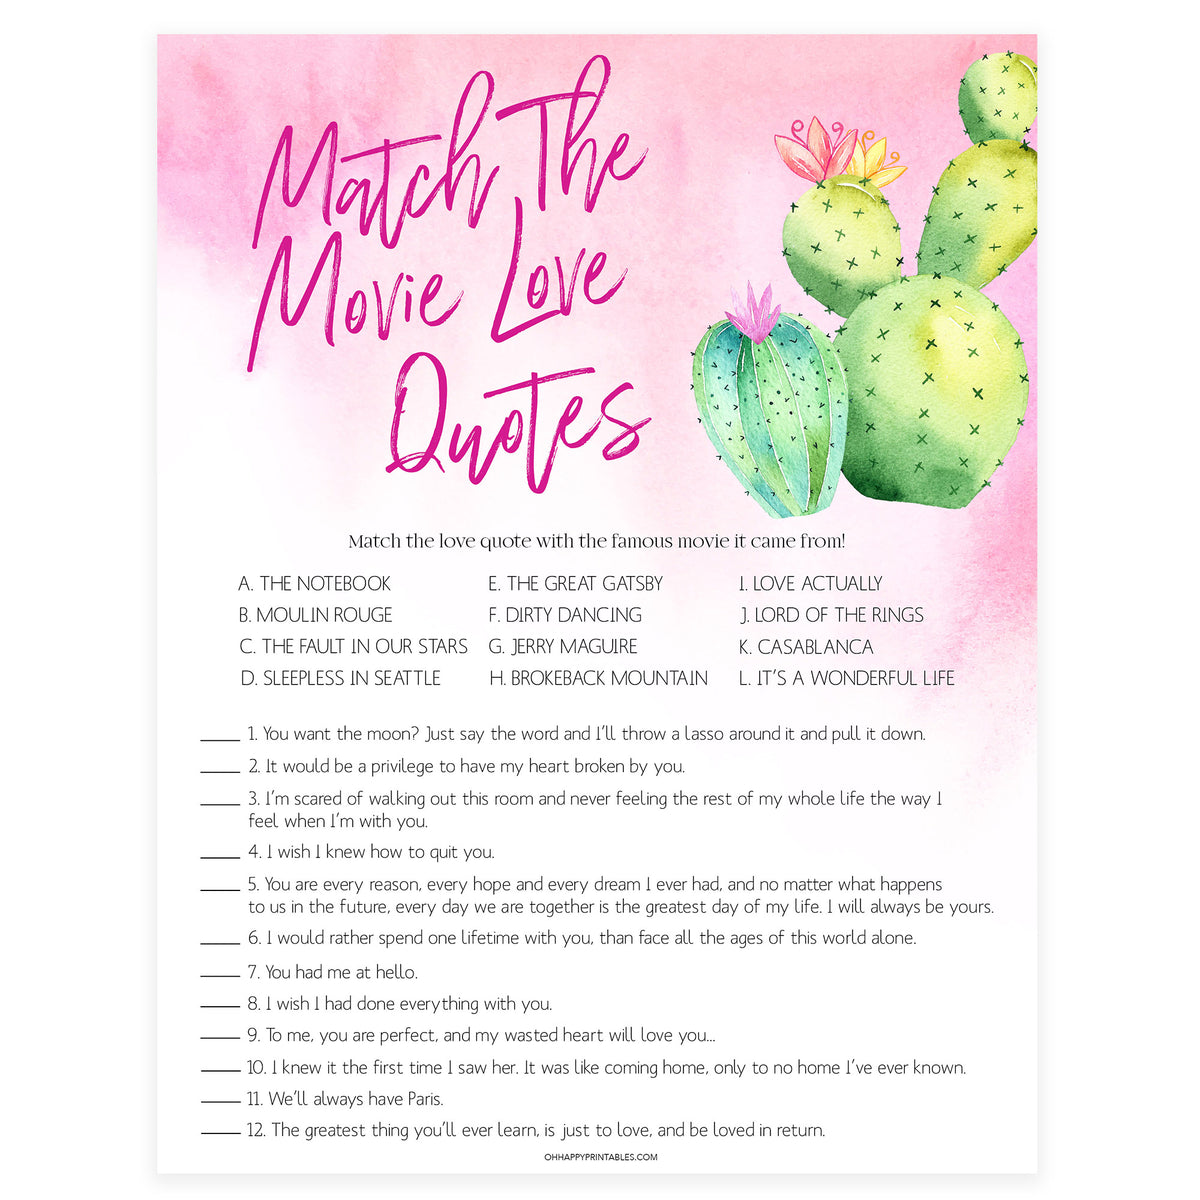 Match the Movie Love Quotes - Fiesta